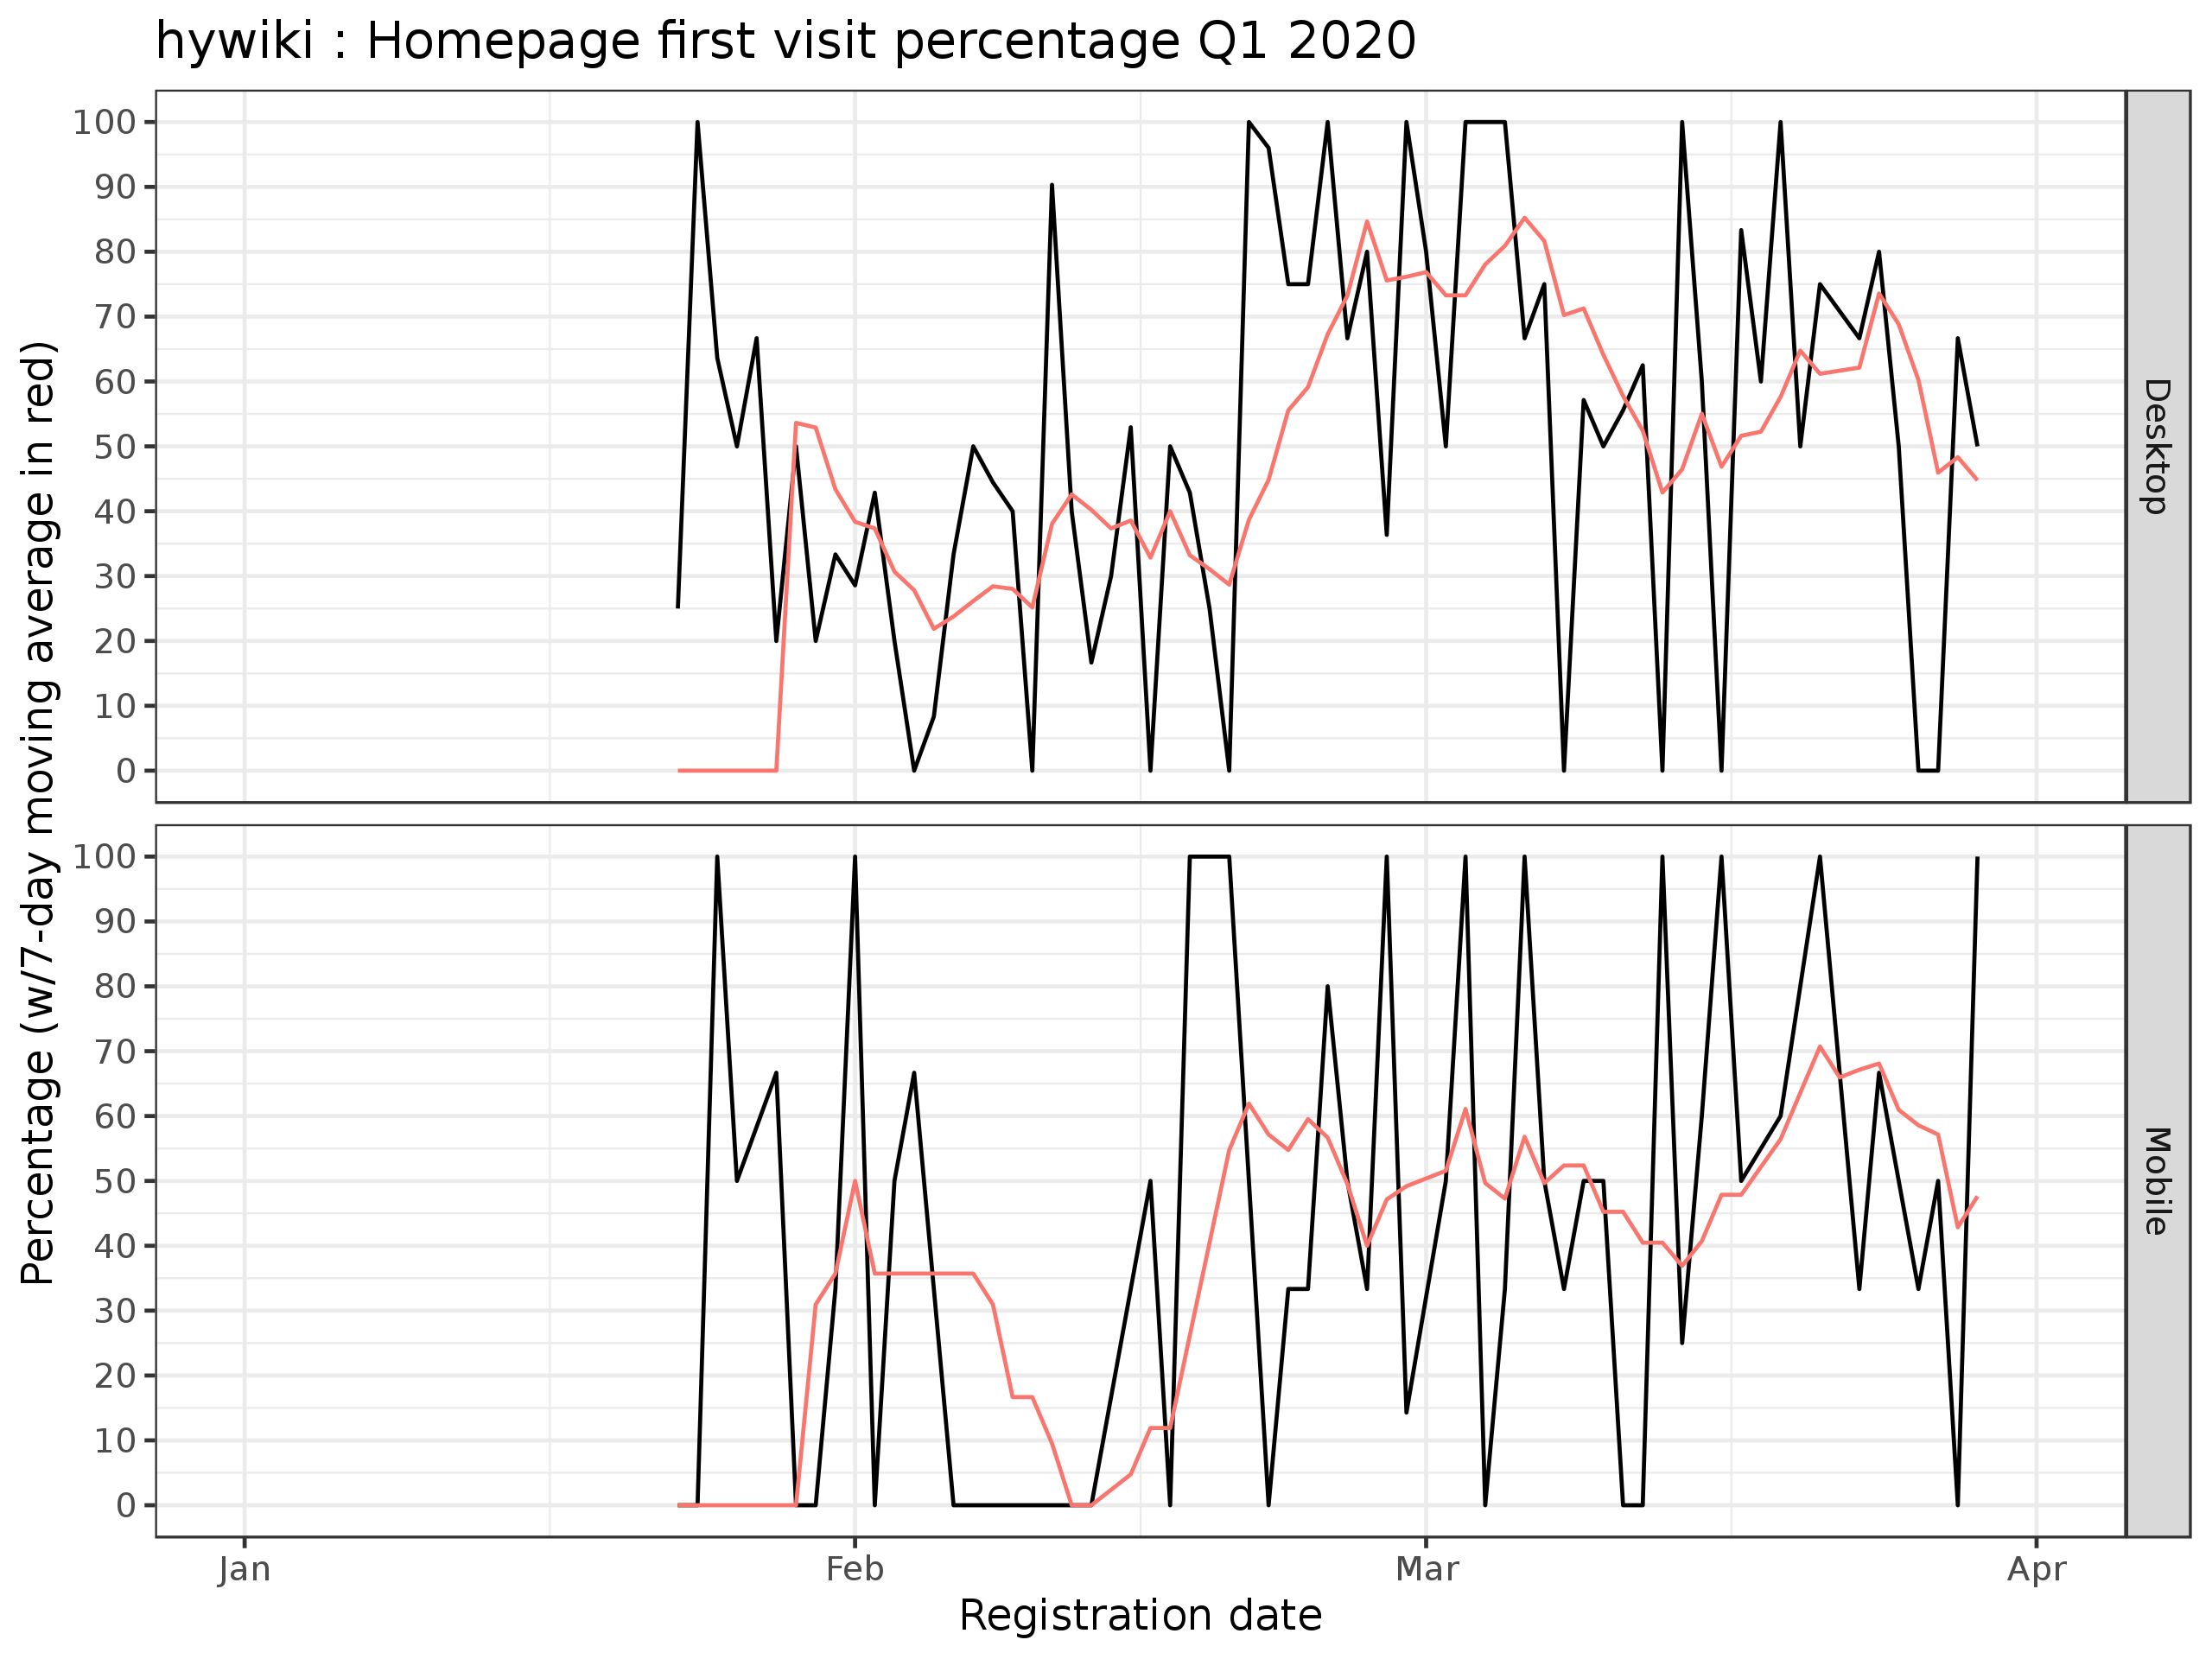 homepage_discovery_rate_Q1_2020_hywiki.png (1×2 px, 384 KB)